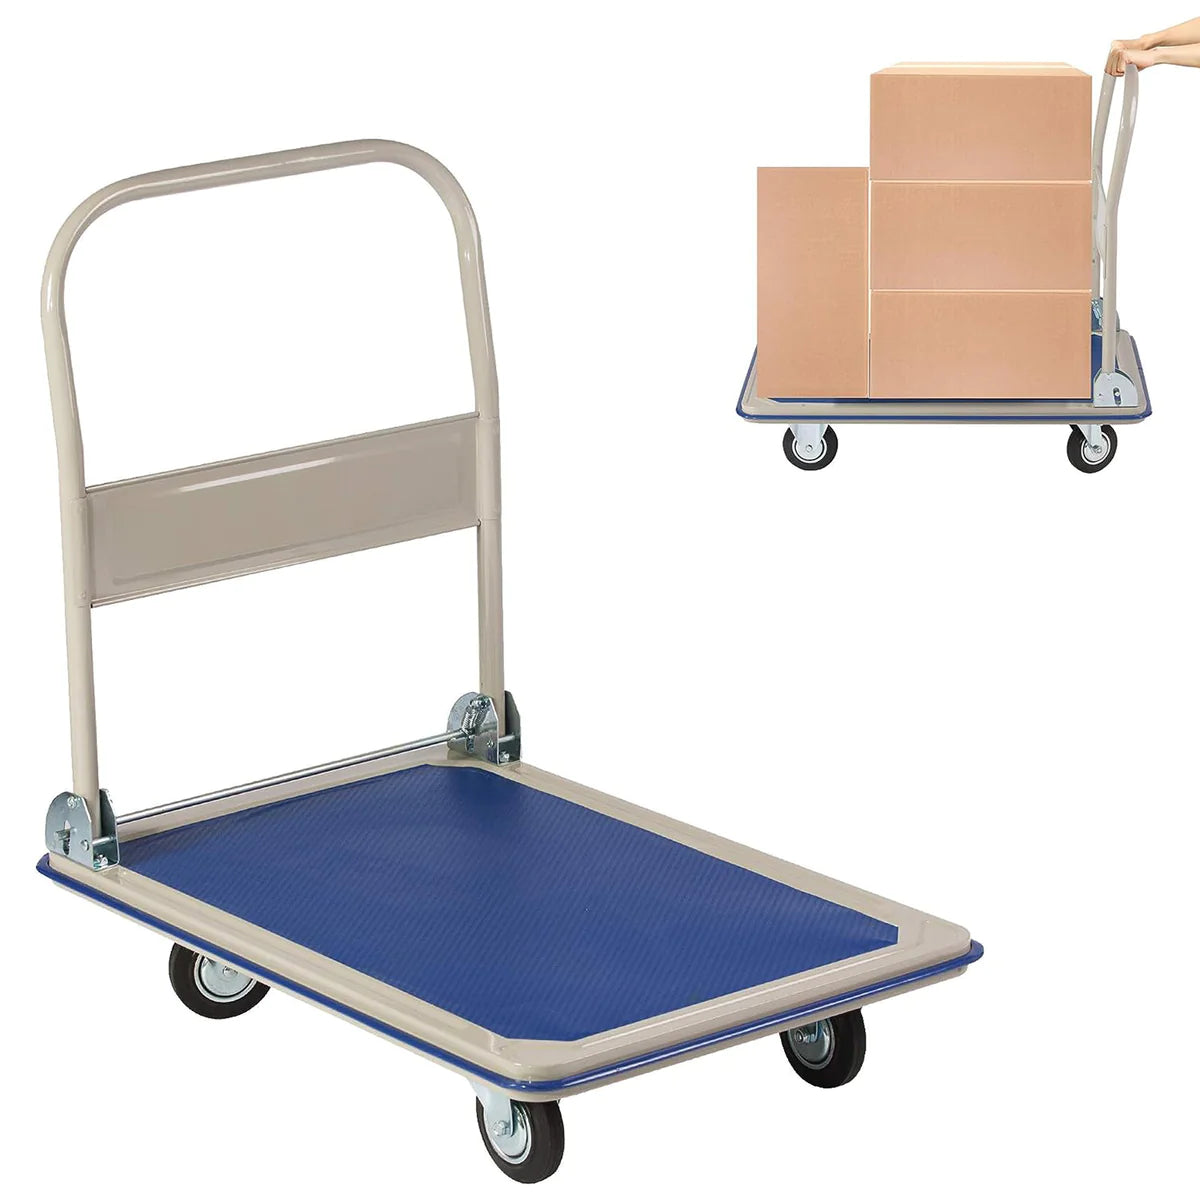 Collapsible Platform Cart Hand Truck Moving Push Flatbed Trolley, 660lbs Capacity